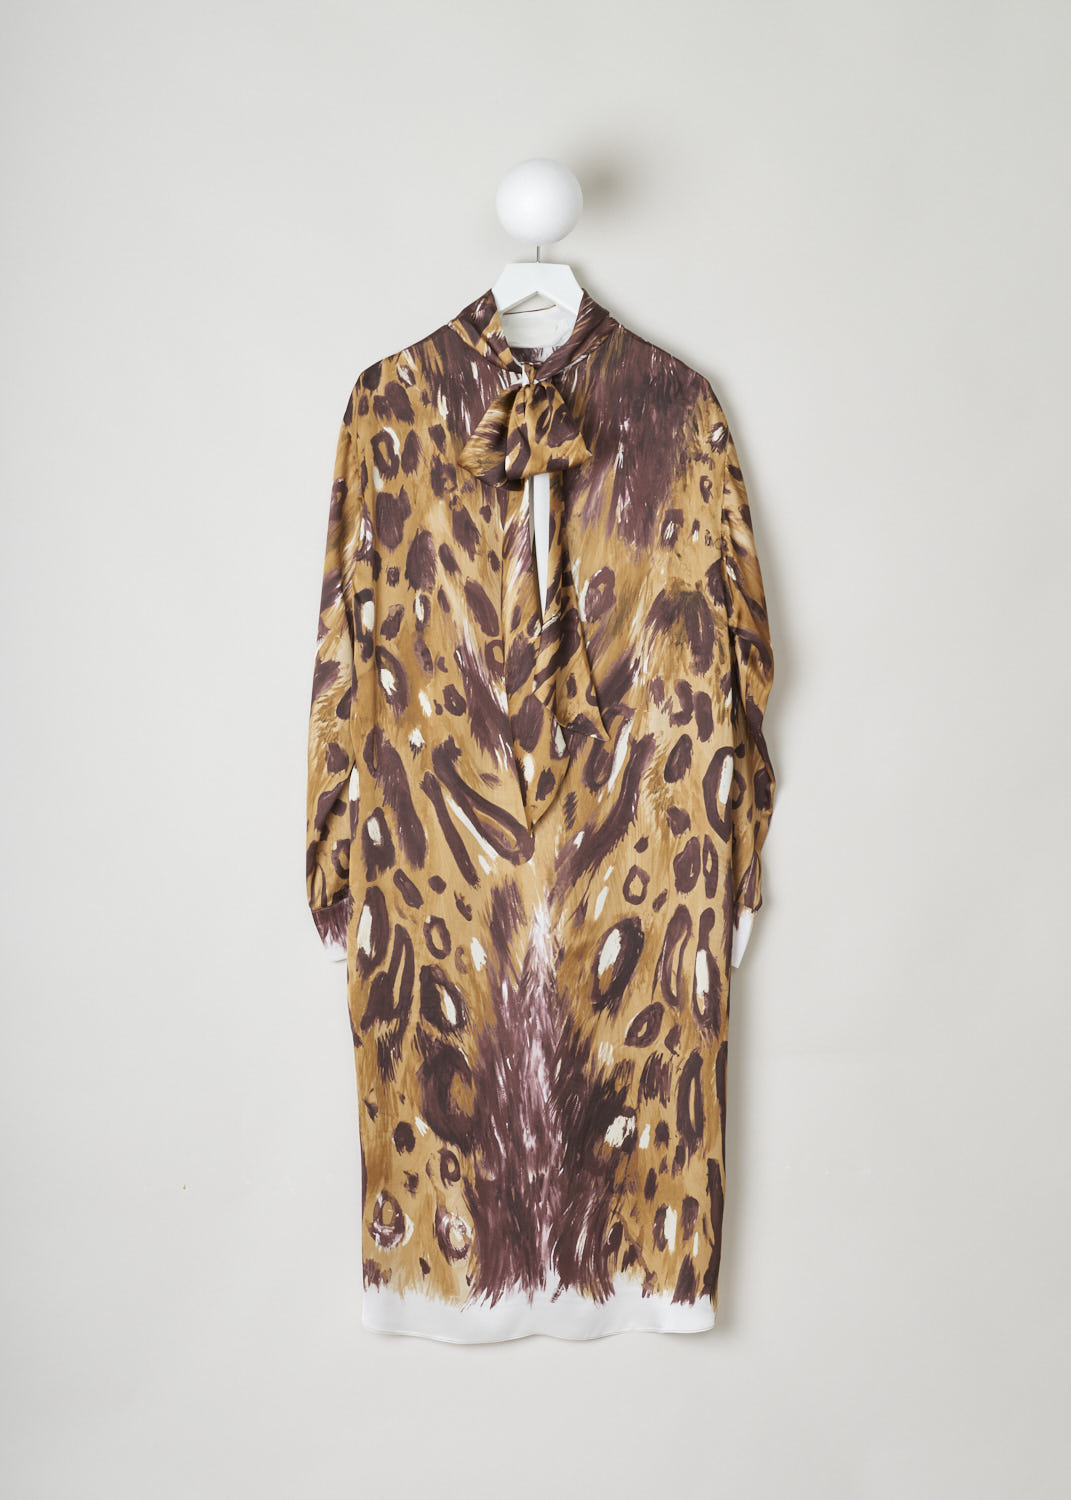 MARNI, ANIMAL PRINT SHIFT DRESS WITH SELF-TIE DETAIL, ABMA0859O0_UTV912_WBM20, Print, Brown, Back This loose fitting midi dress is made in a satin animal print. Most noteworthy is the self-tie detail, with the ends draping along the back. The long sleeves had cuffed ends. The model has an asymmetrical finish, meaning the back is a little longer than the front. On either side, rounded slits can be found. Three buttons in the back function as the closure option.
